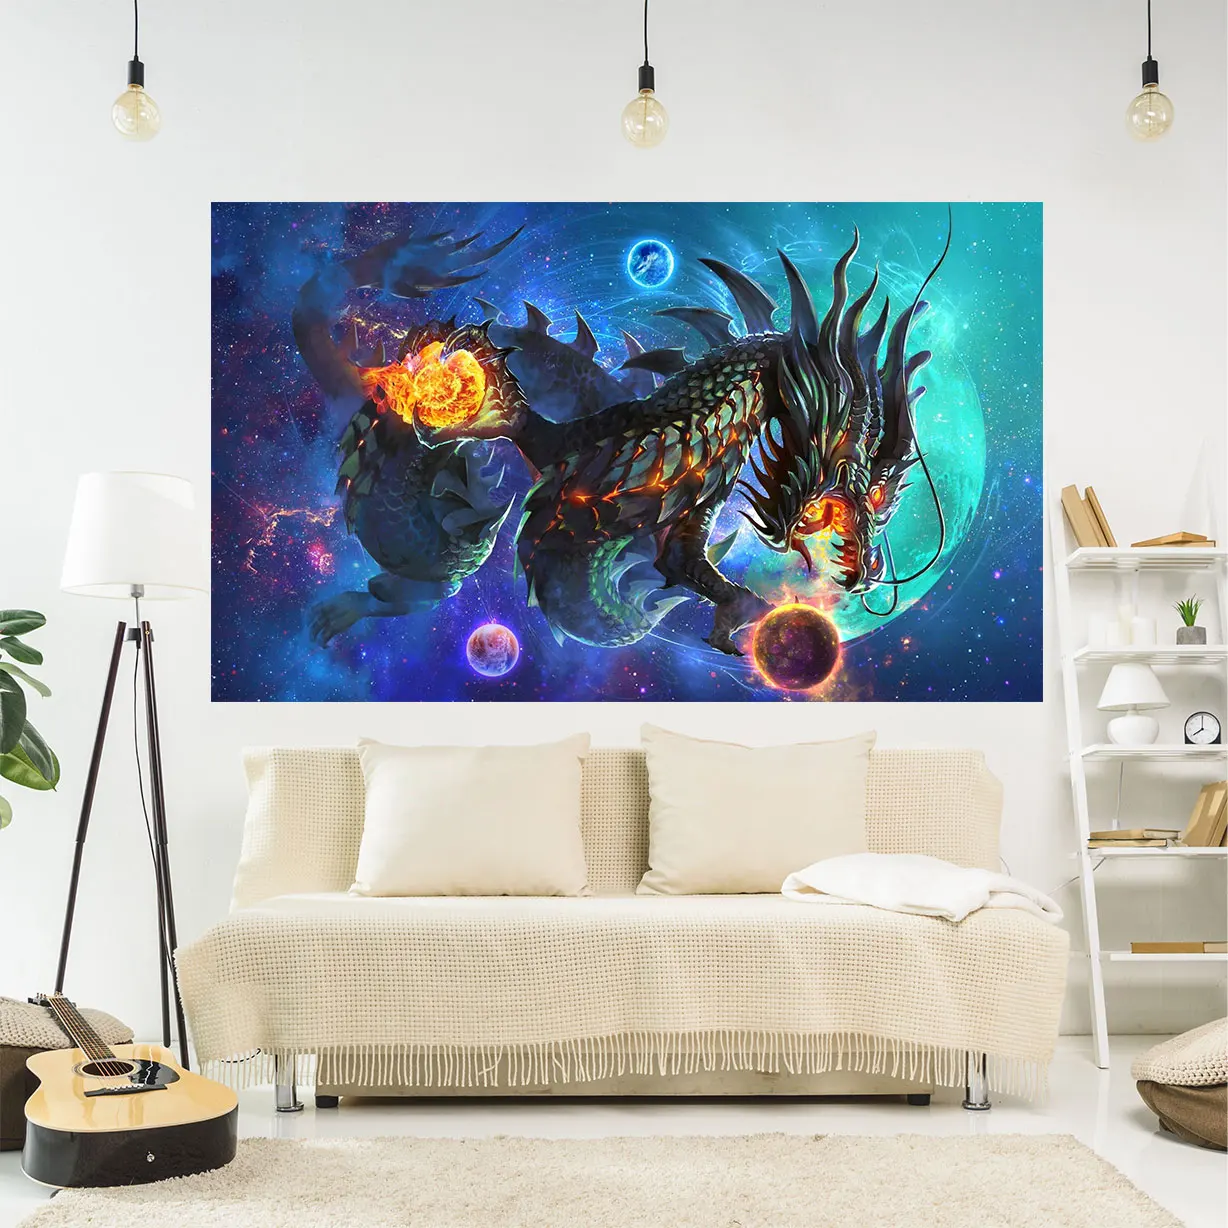 Psychedelic Tapestry Cosmic Dragon Printed Wall Hanging Carpets Sofa Blanket Art Aesthetic Home Decorative